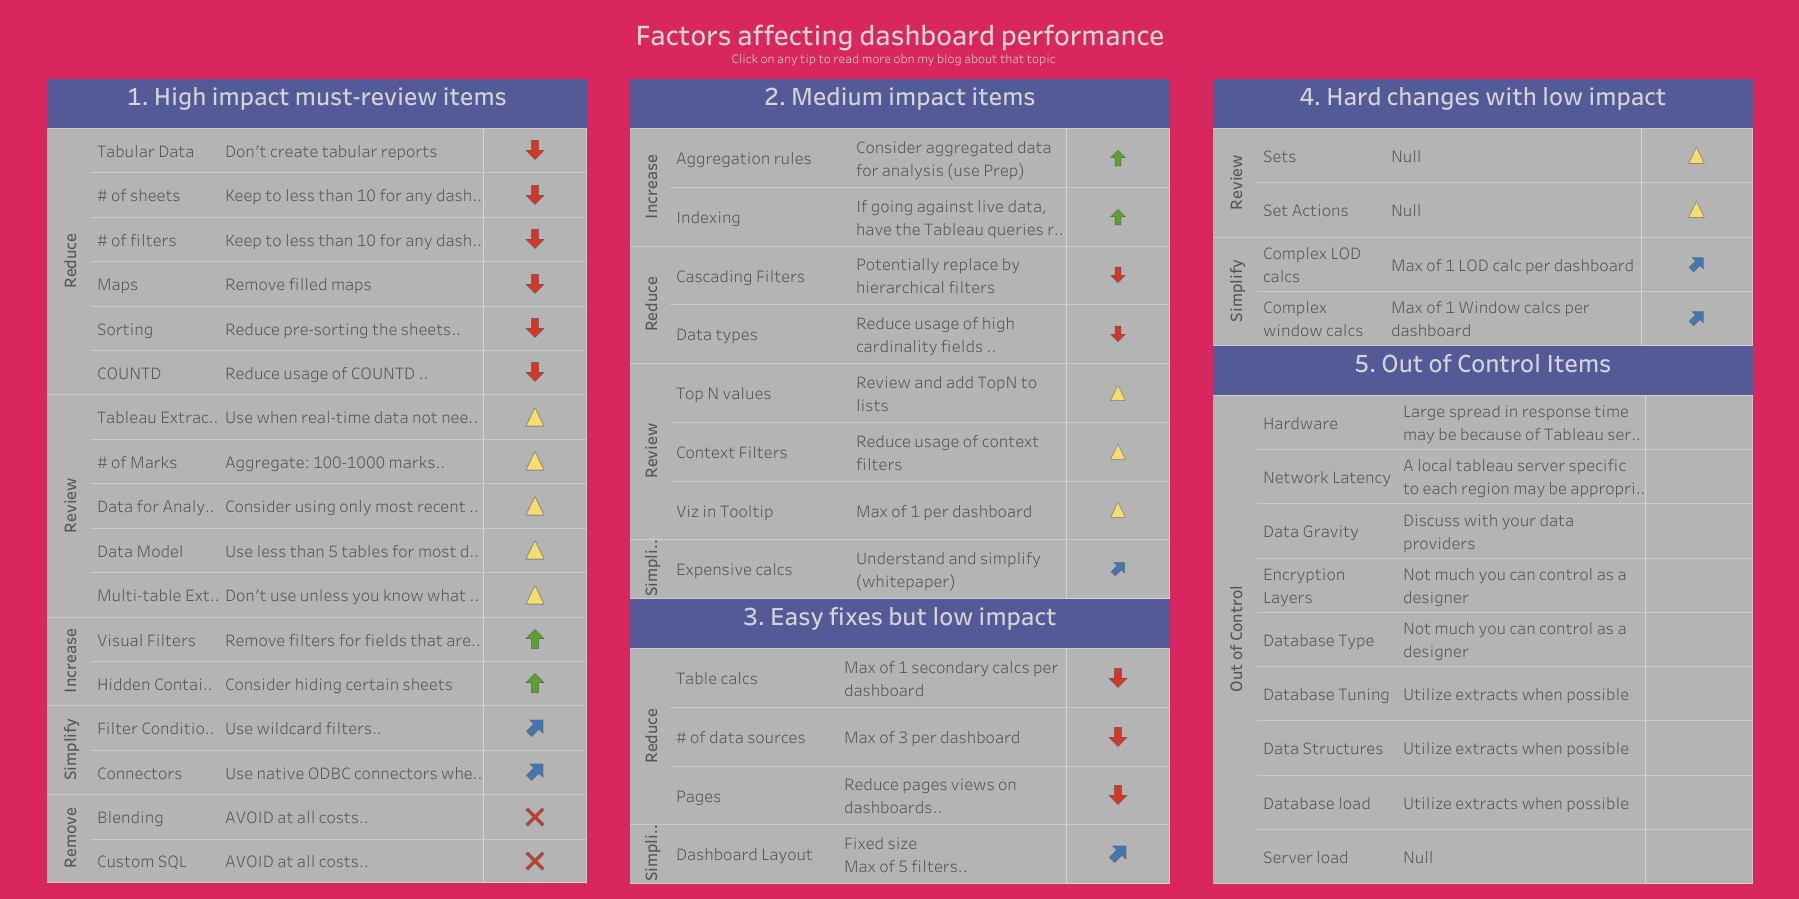 Factors affecting dashboard performance